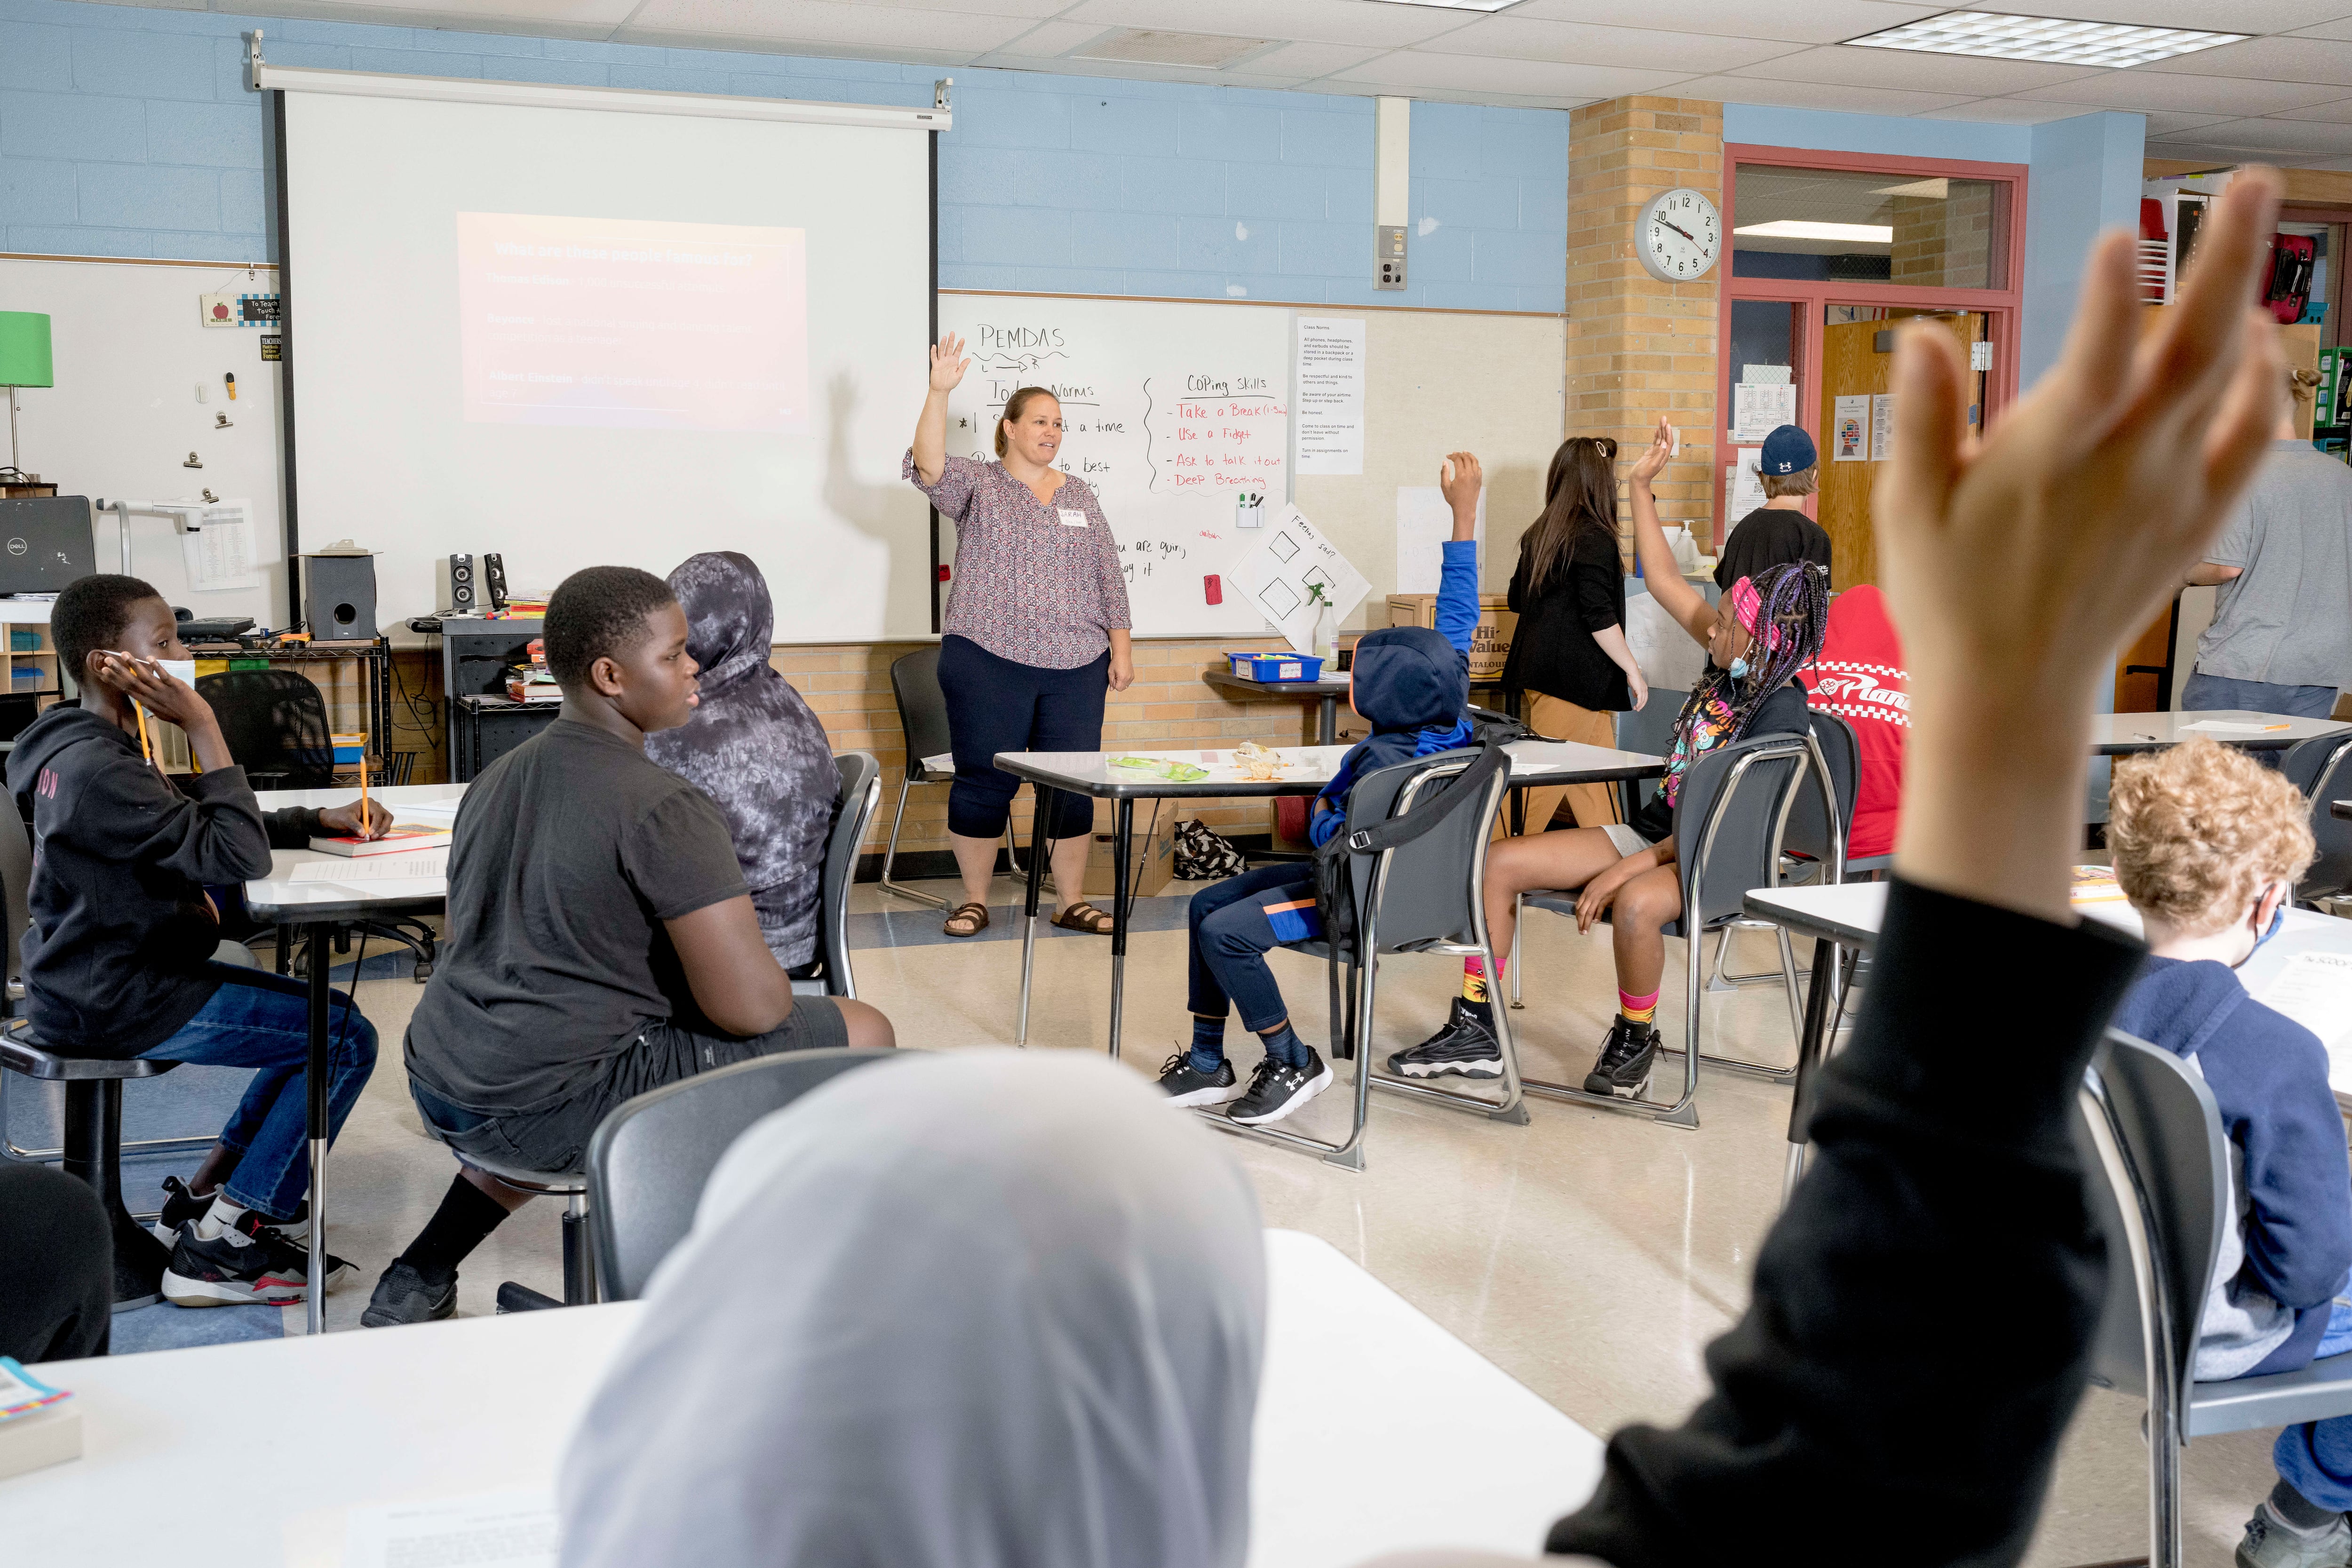 A woman teacher leads her classroom during a lesson, a student in the foreground raising their hand amongst other students in the class.